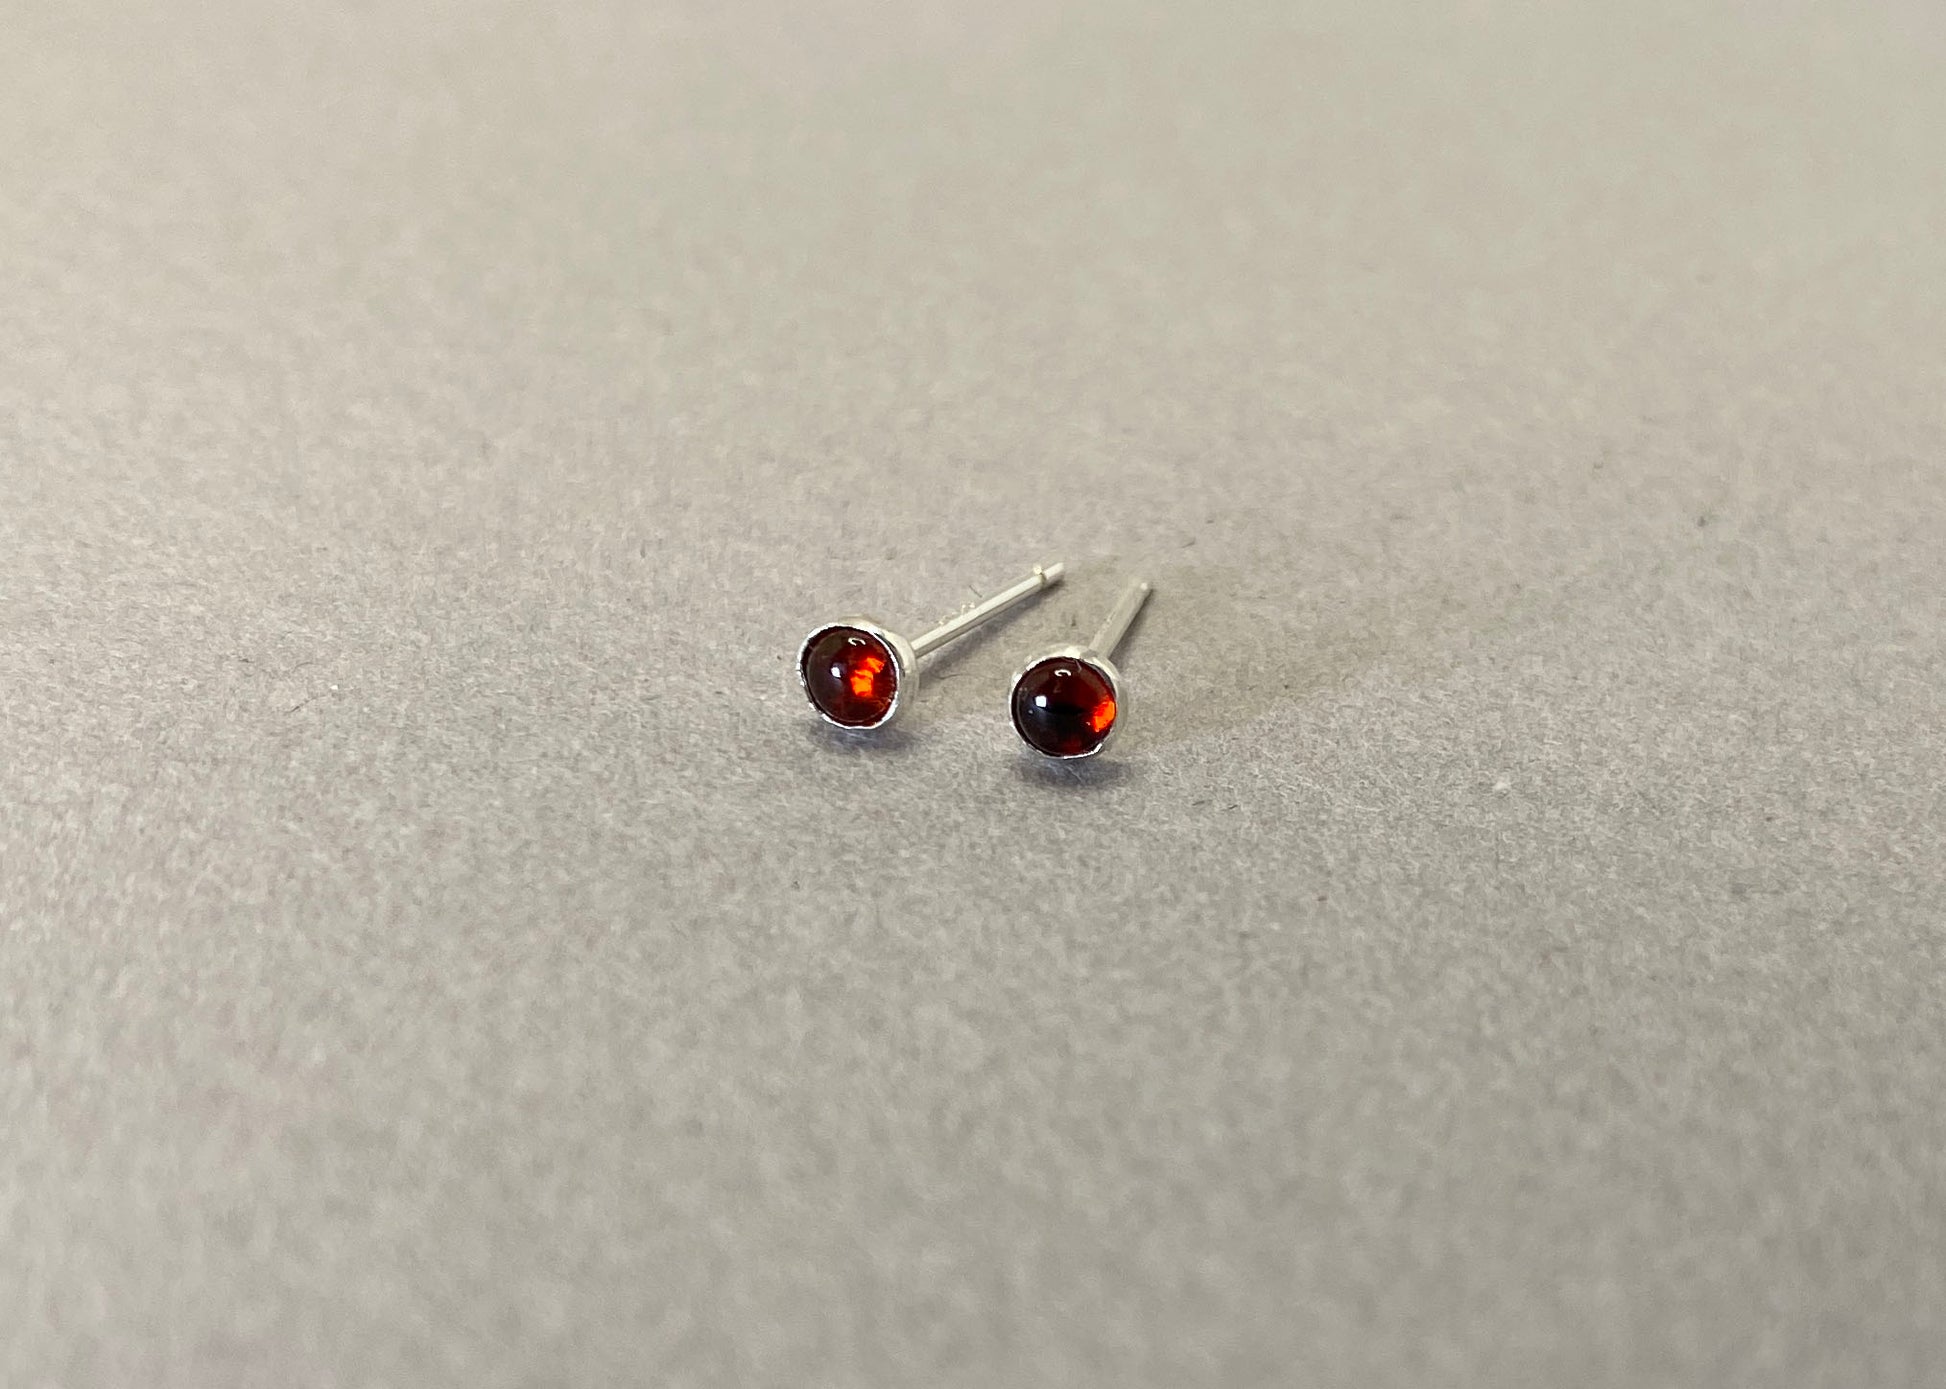 Garnet is the January birthstone, and has traditionally symbolized sentiments like love, friendship, and commitment. 